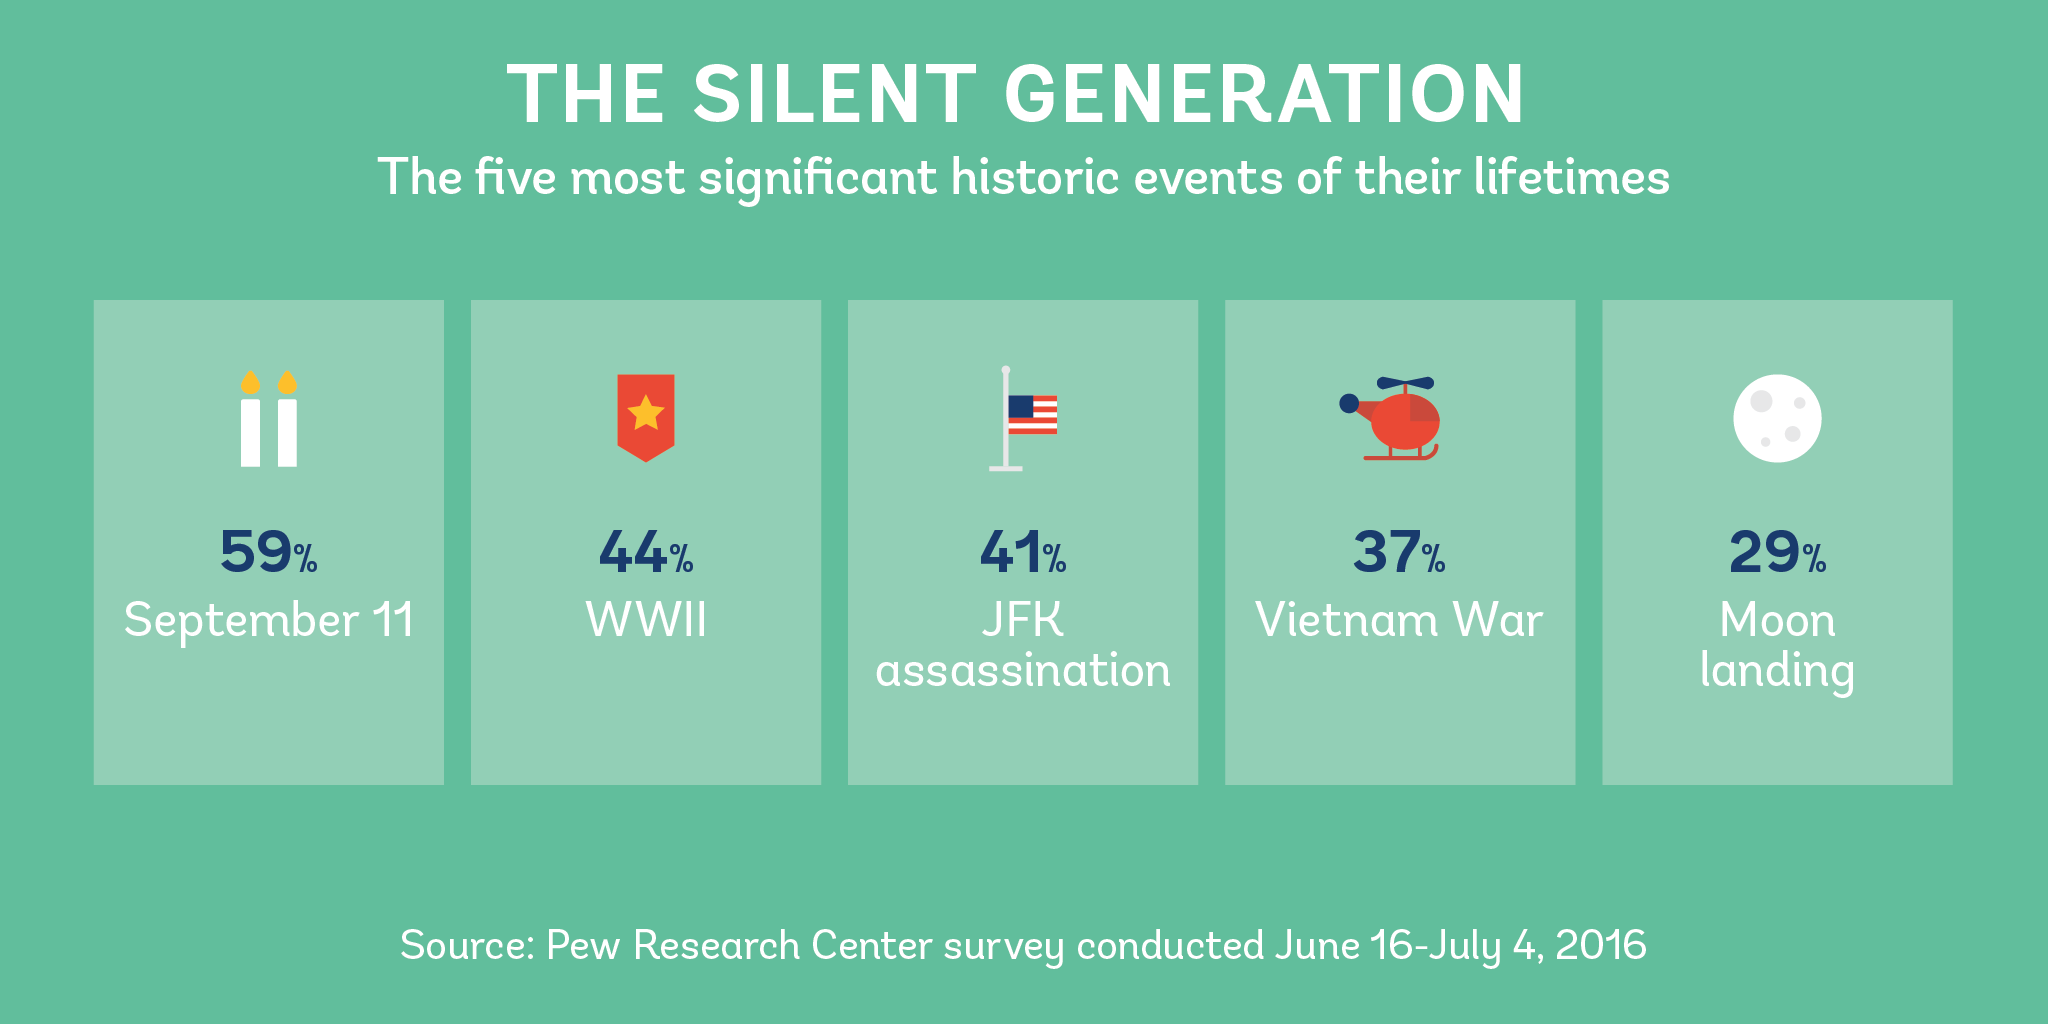 Living Facts on Twitter: "But many in the Generation (those 1928-1945) also named World War JFK's assassination, and the Vietnam War as the most significant events in their lifetime.